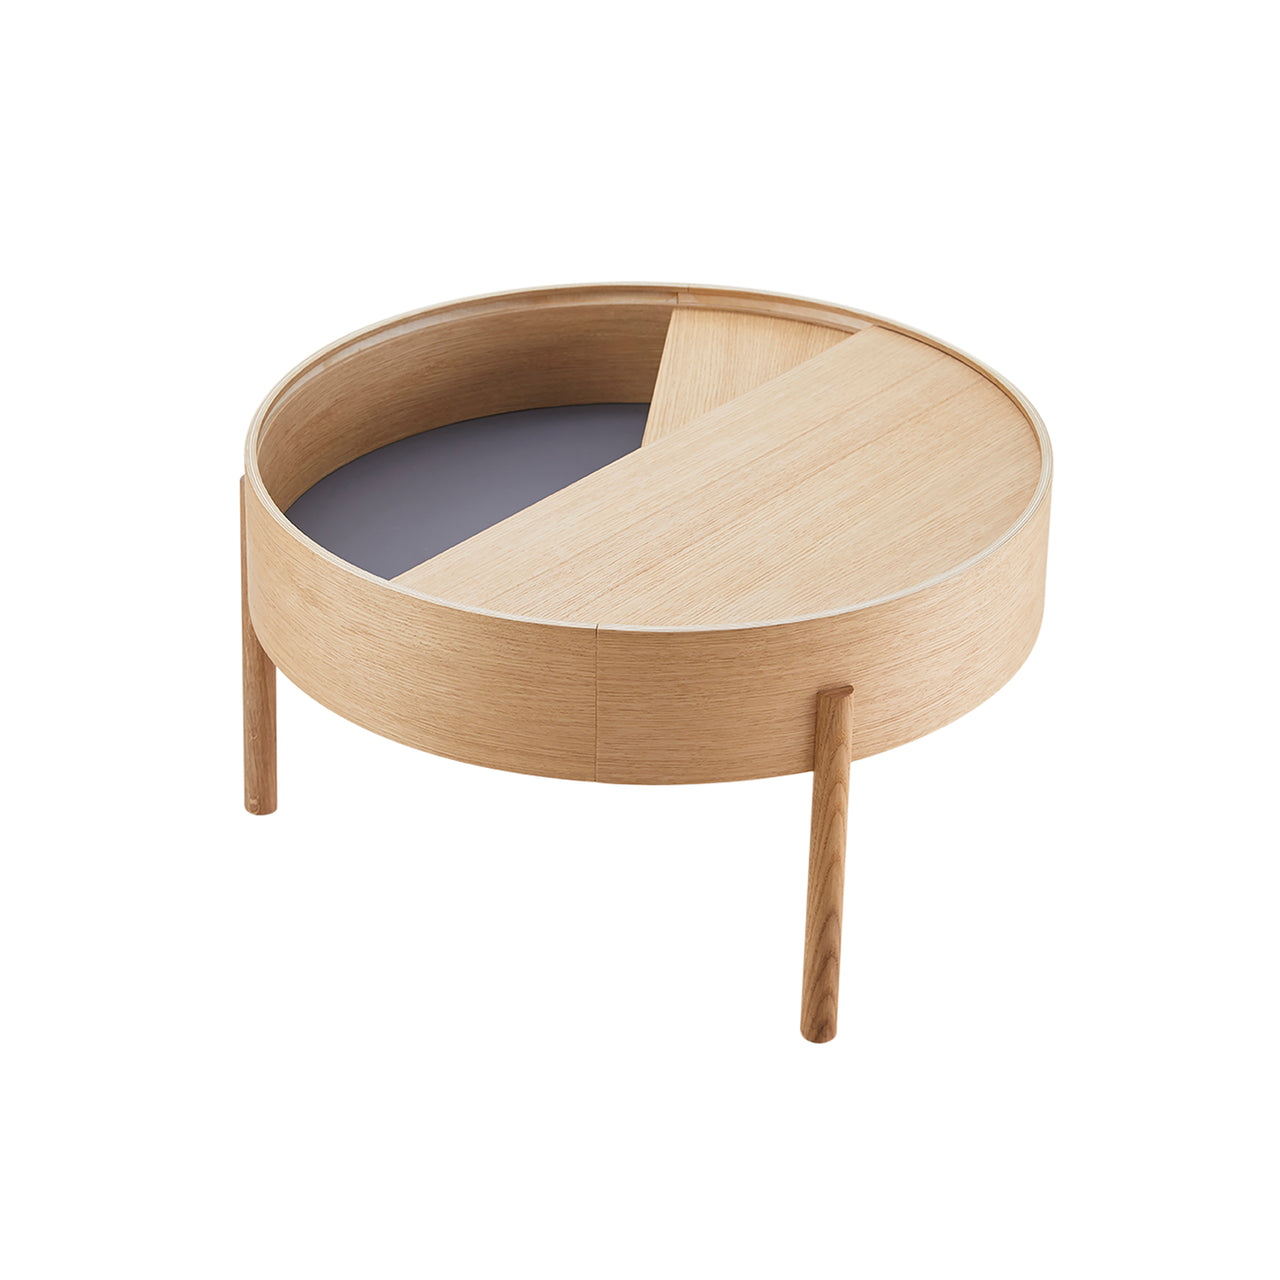 Arc Coffee Table: Small - 26